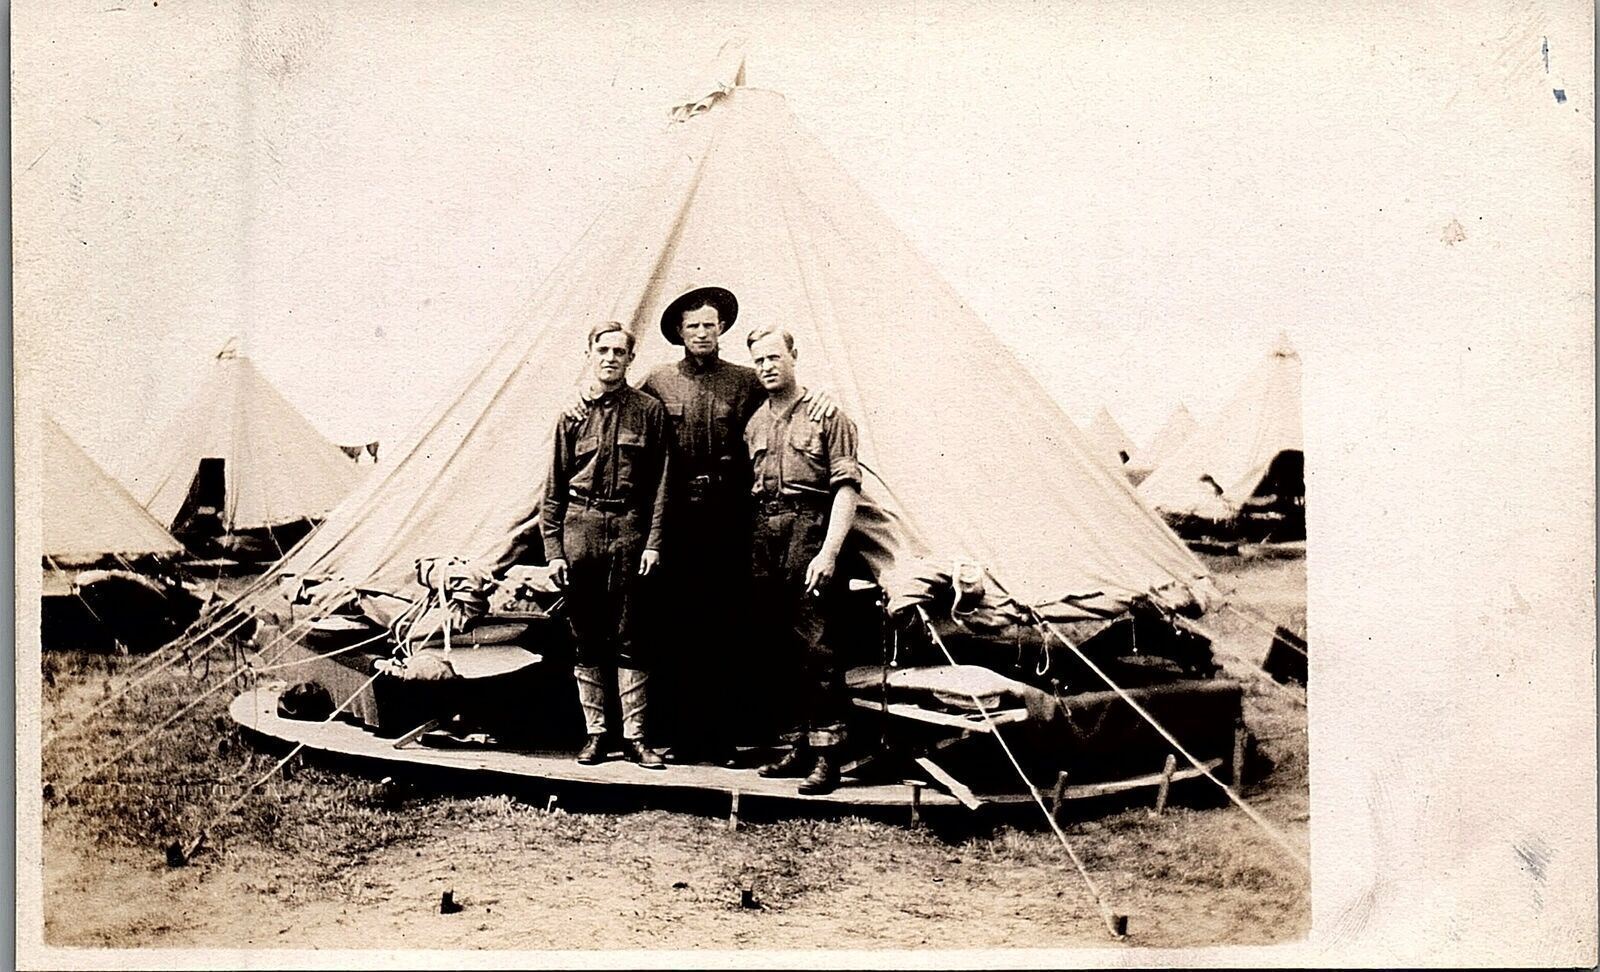 c1918 WWI SOLDIERS IN FRONT OF CONICAL ARMY TENT REAL PHOTO POSTCARD 29-153